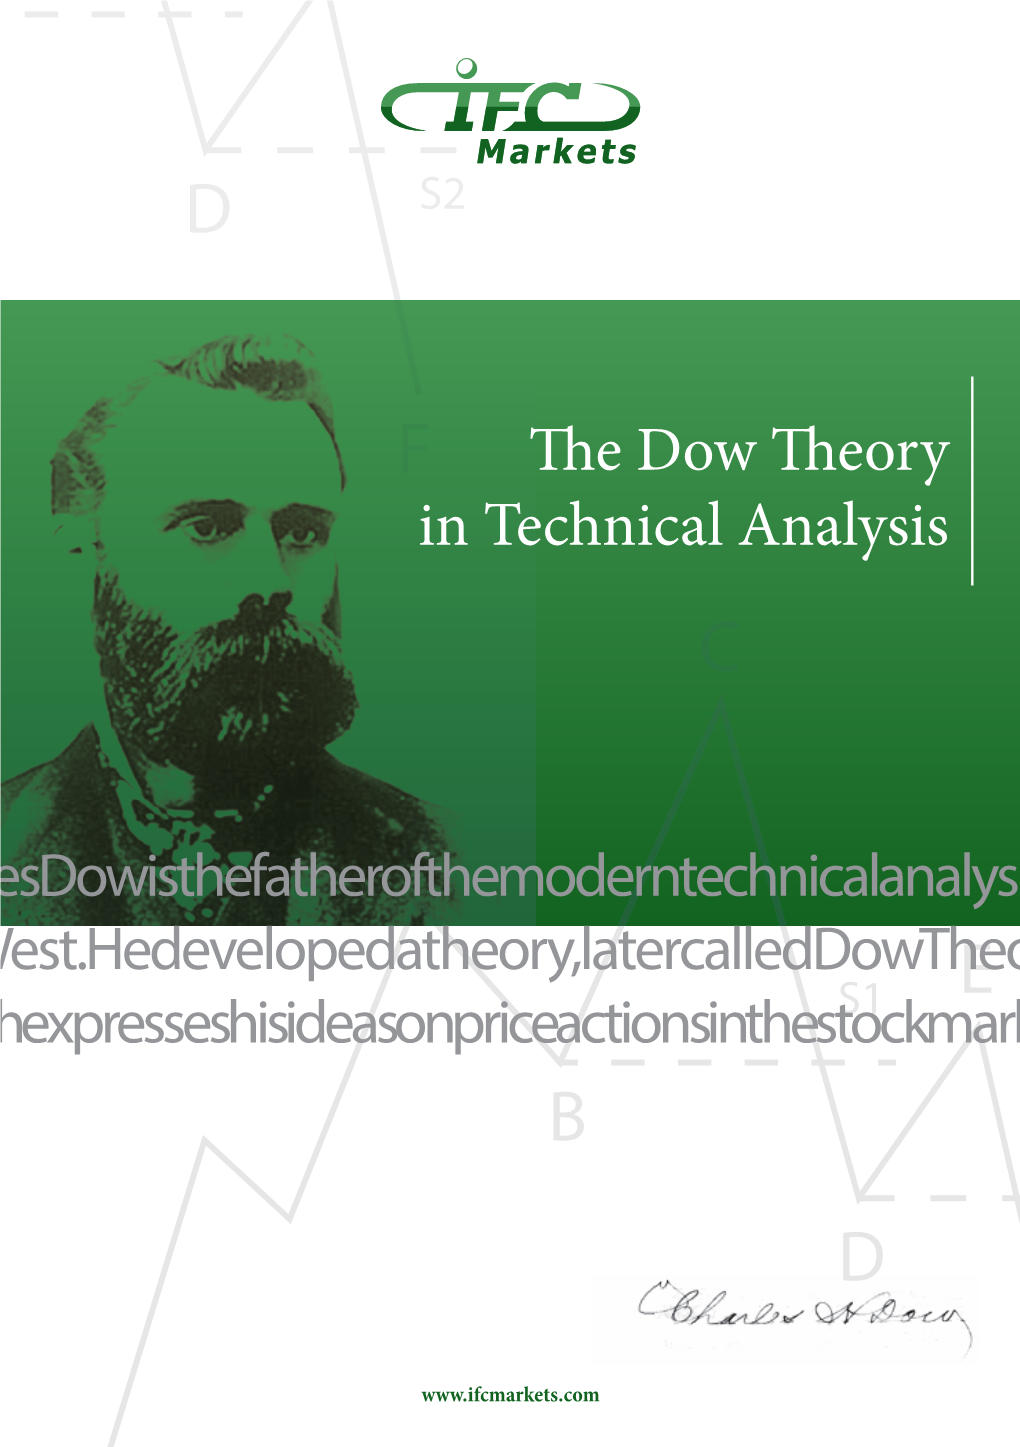 The Dow Theory in Technical Analysis